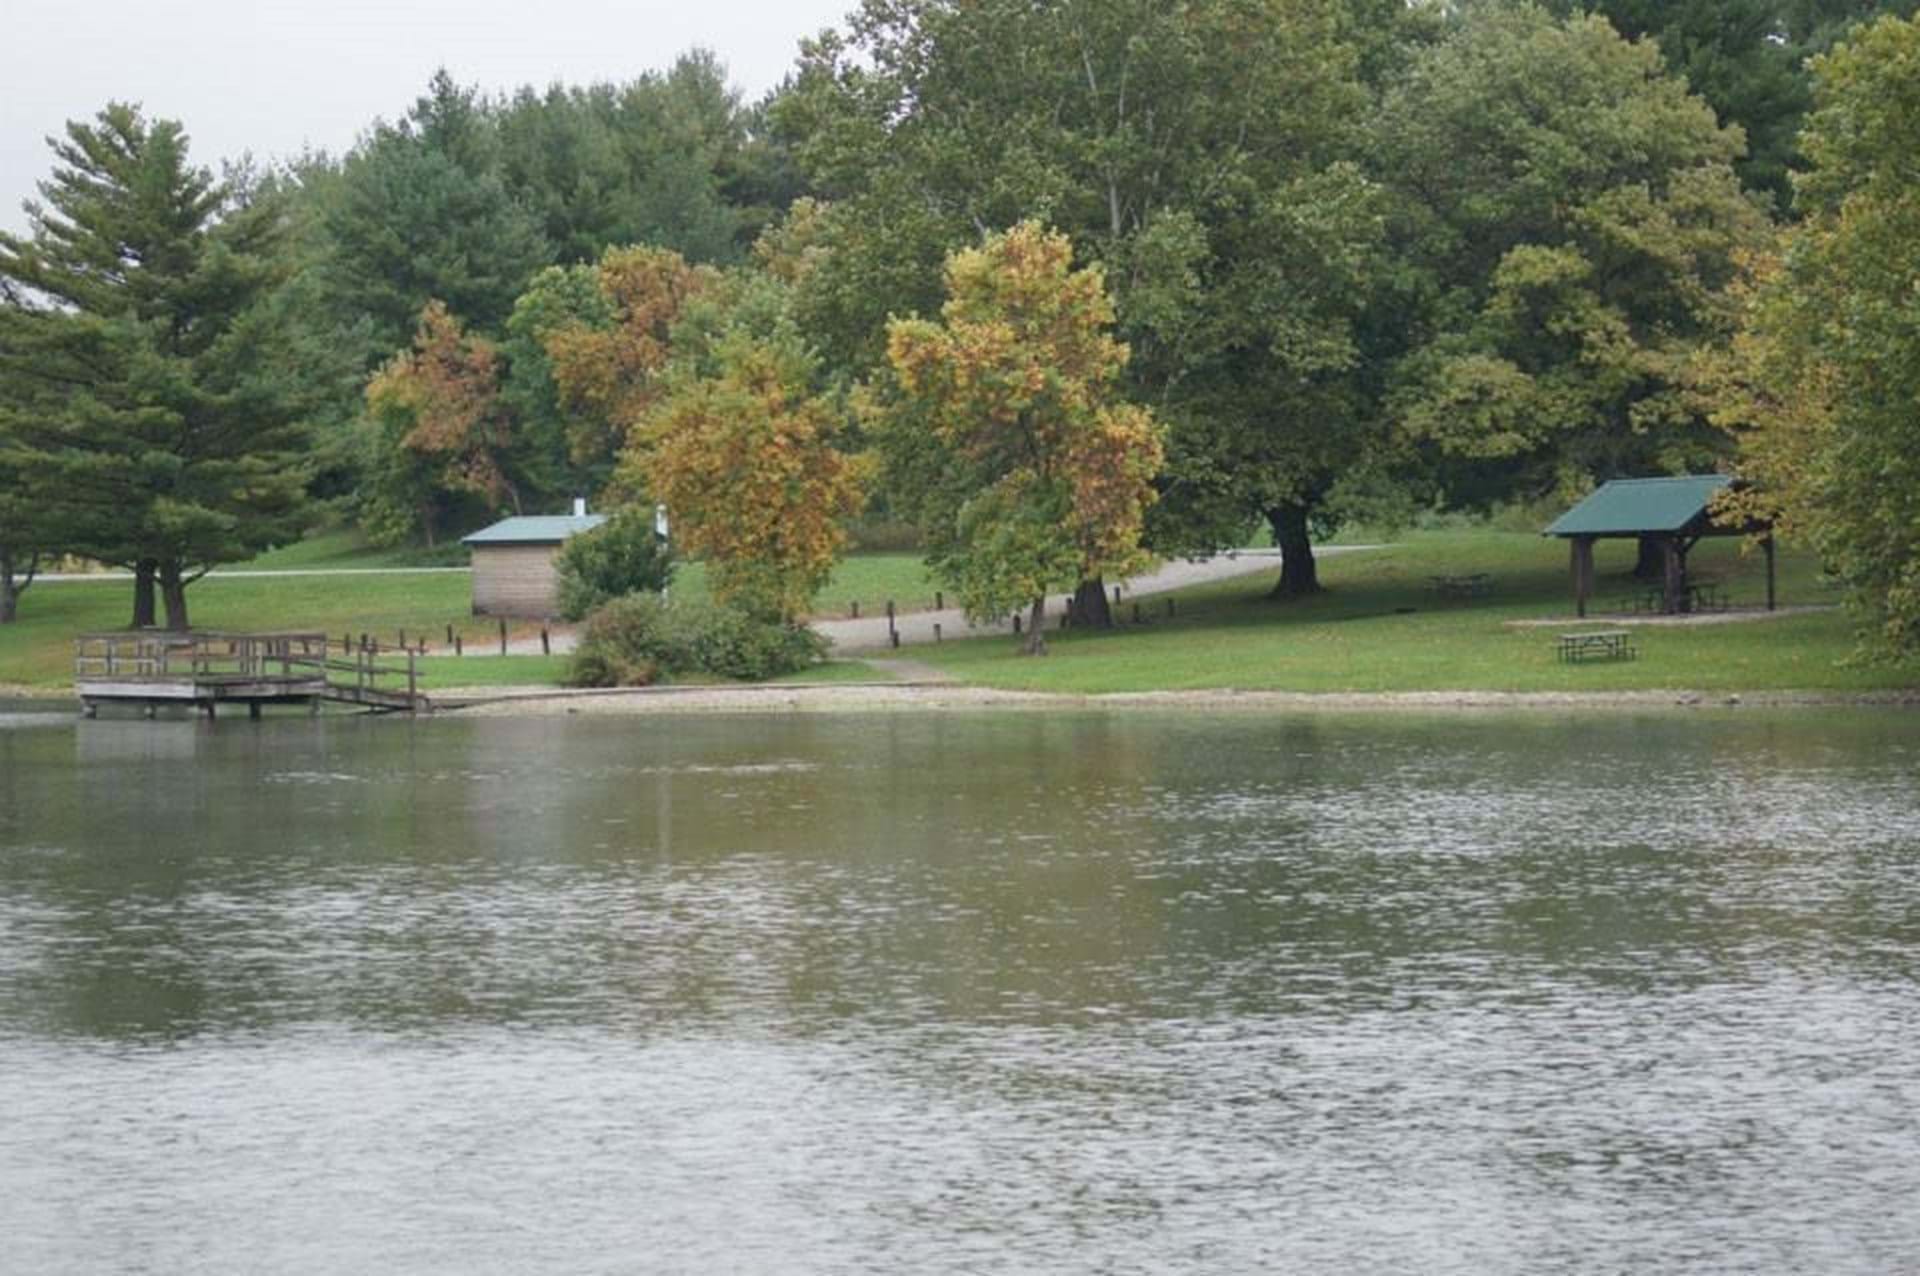 17 acre lake for fishing and boating